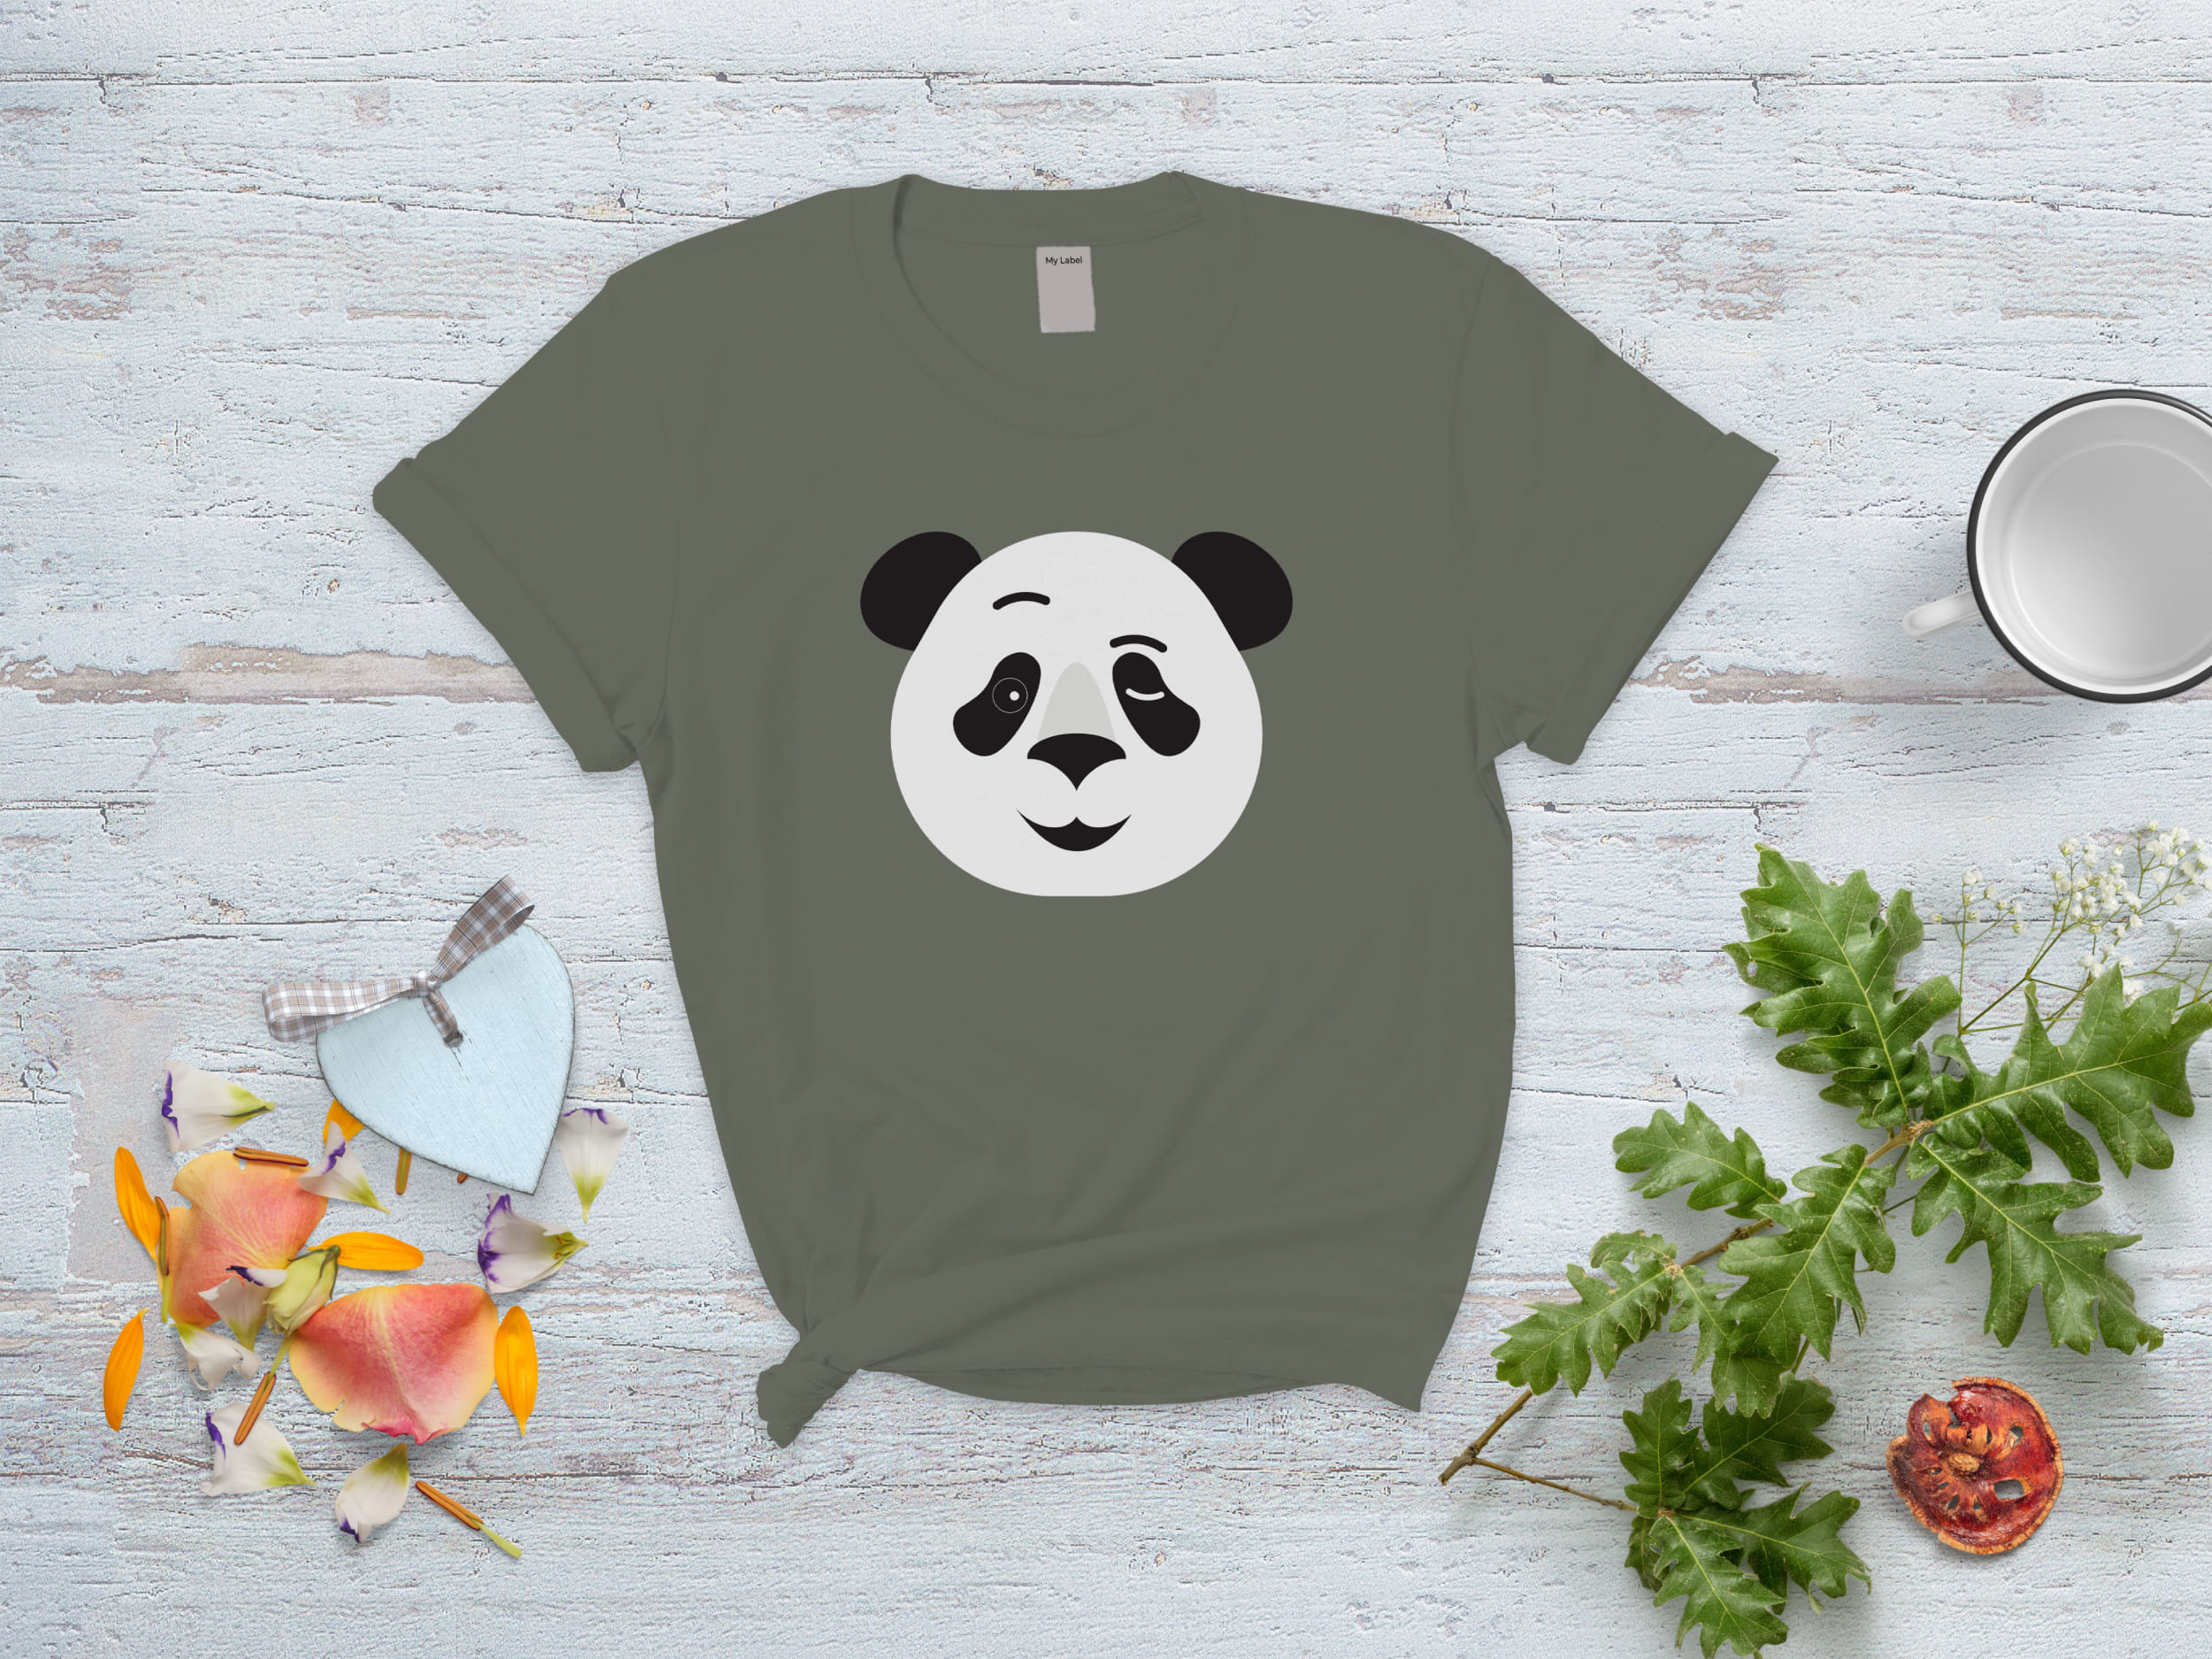 Gray t-shirt with a panda happy face on a gray and white background with various objects.